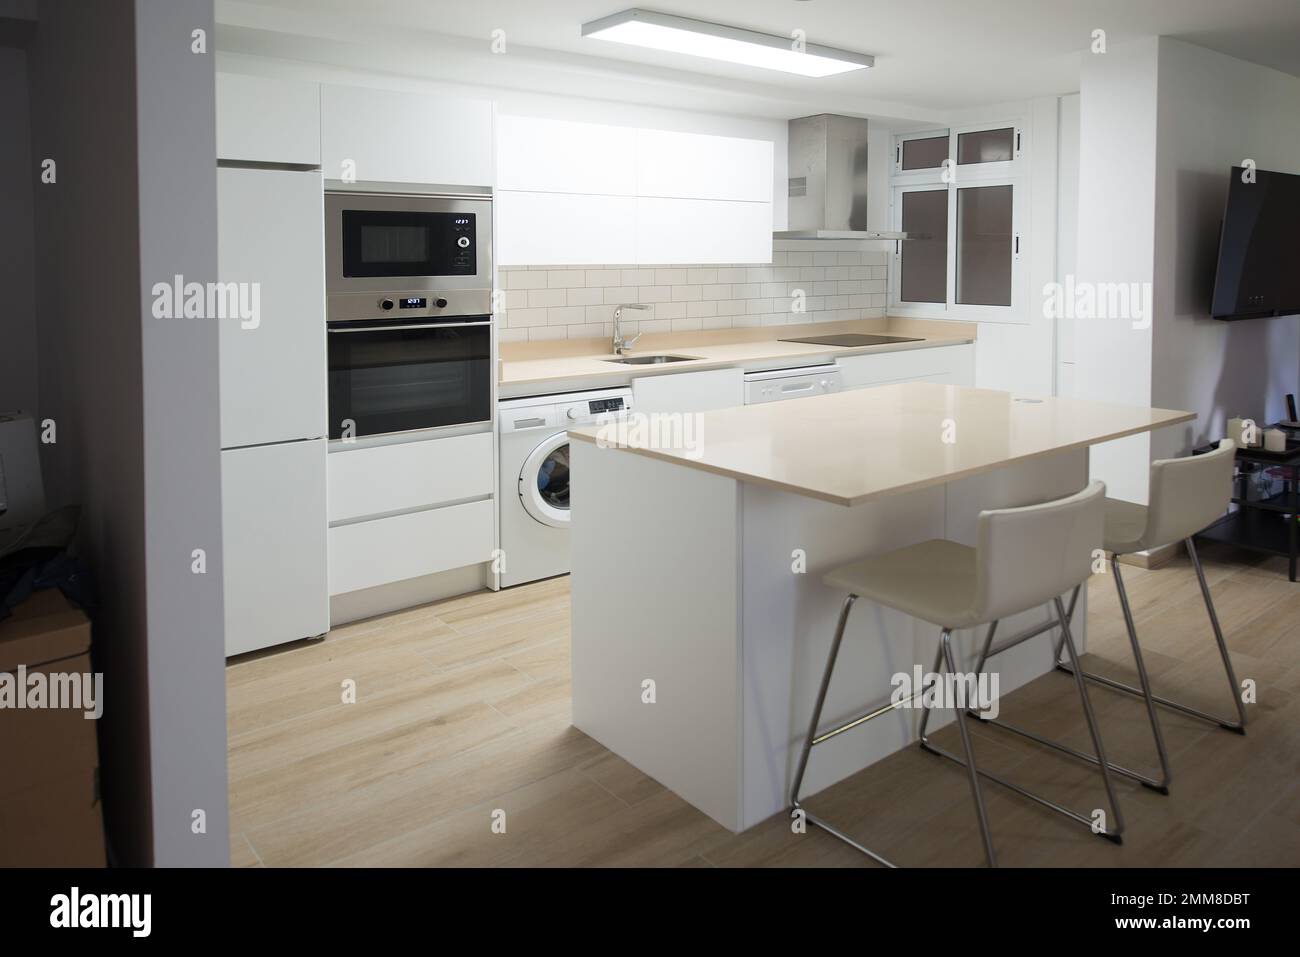 Modern electric cooking appliances and built in cabinets inside kitchen of  home Stock Photo - Alamy